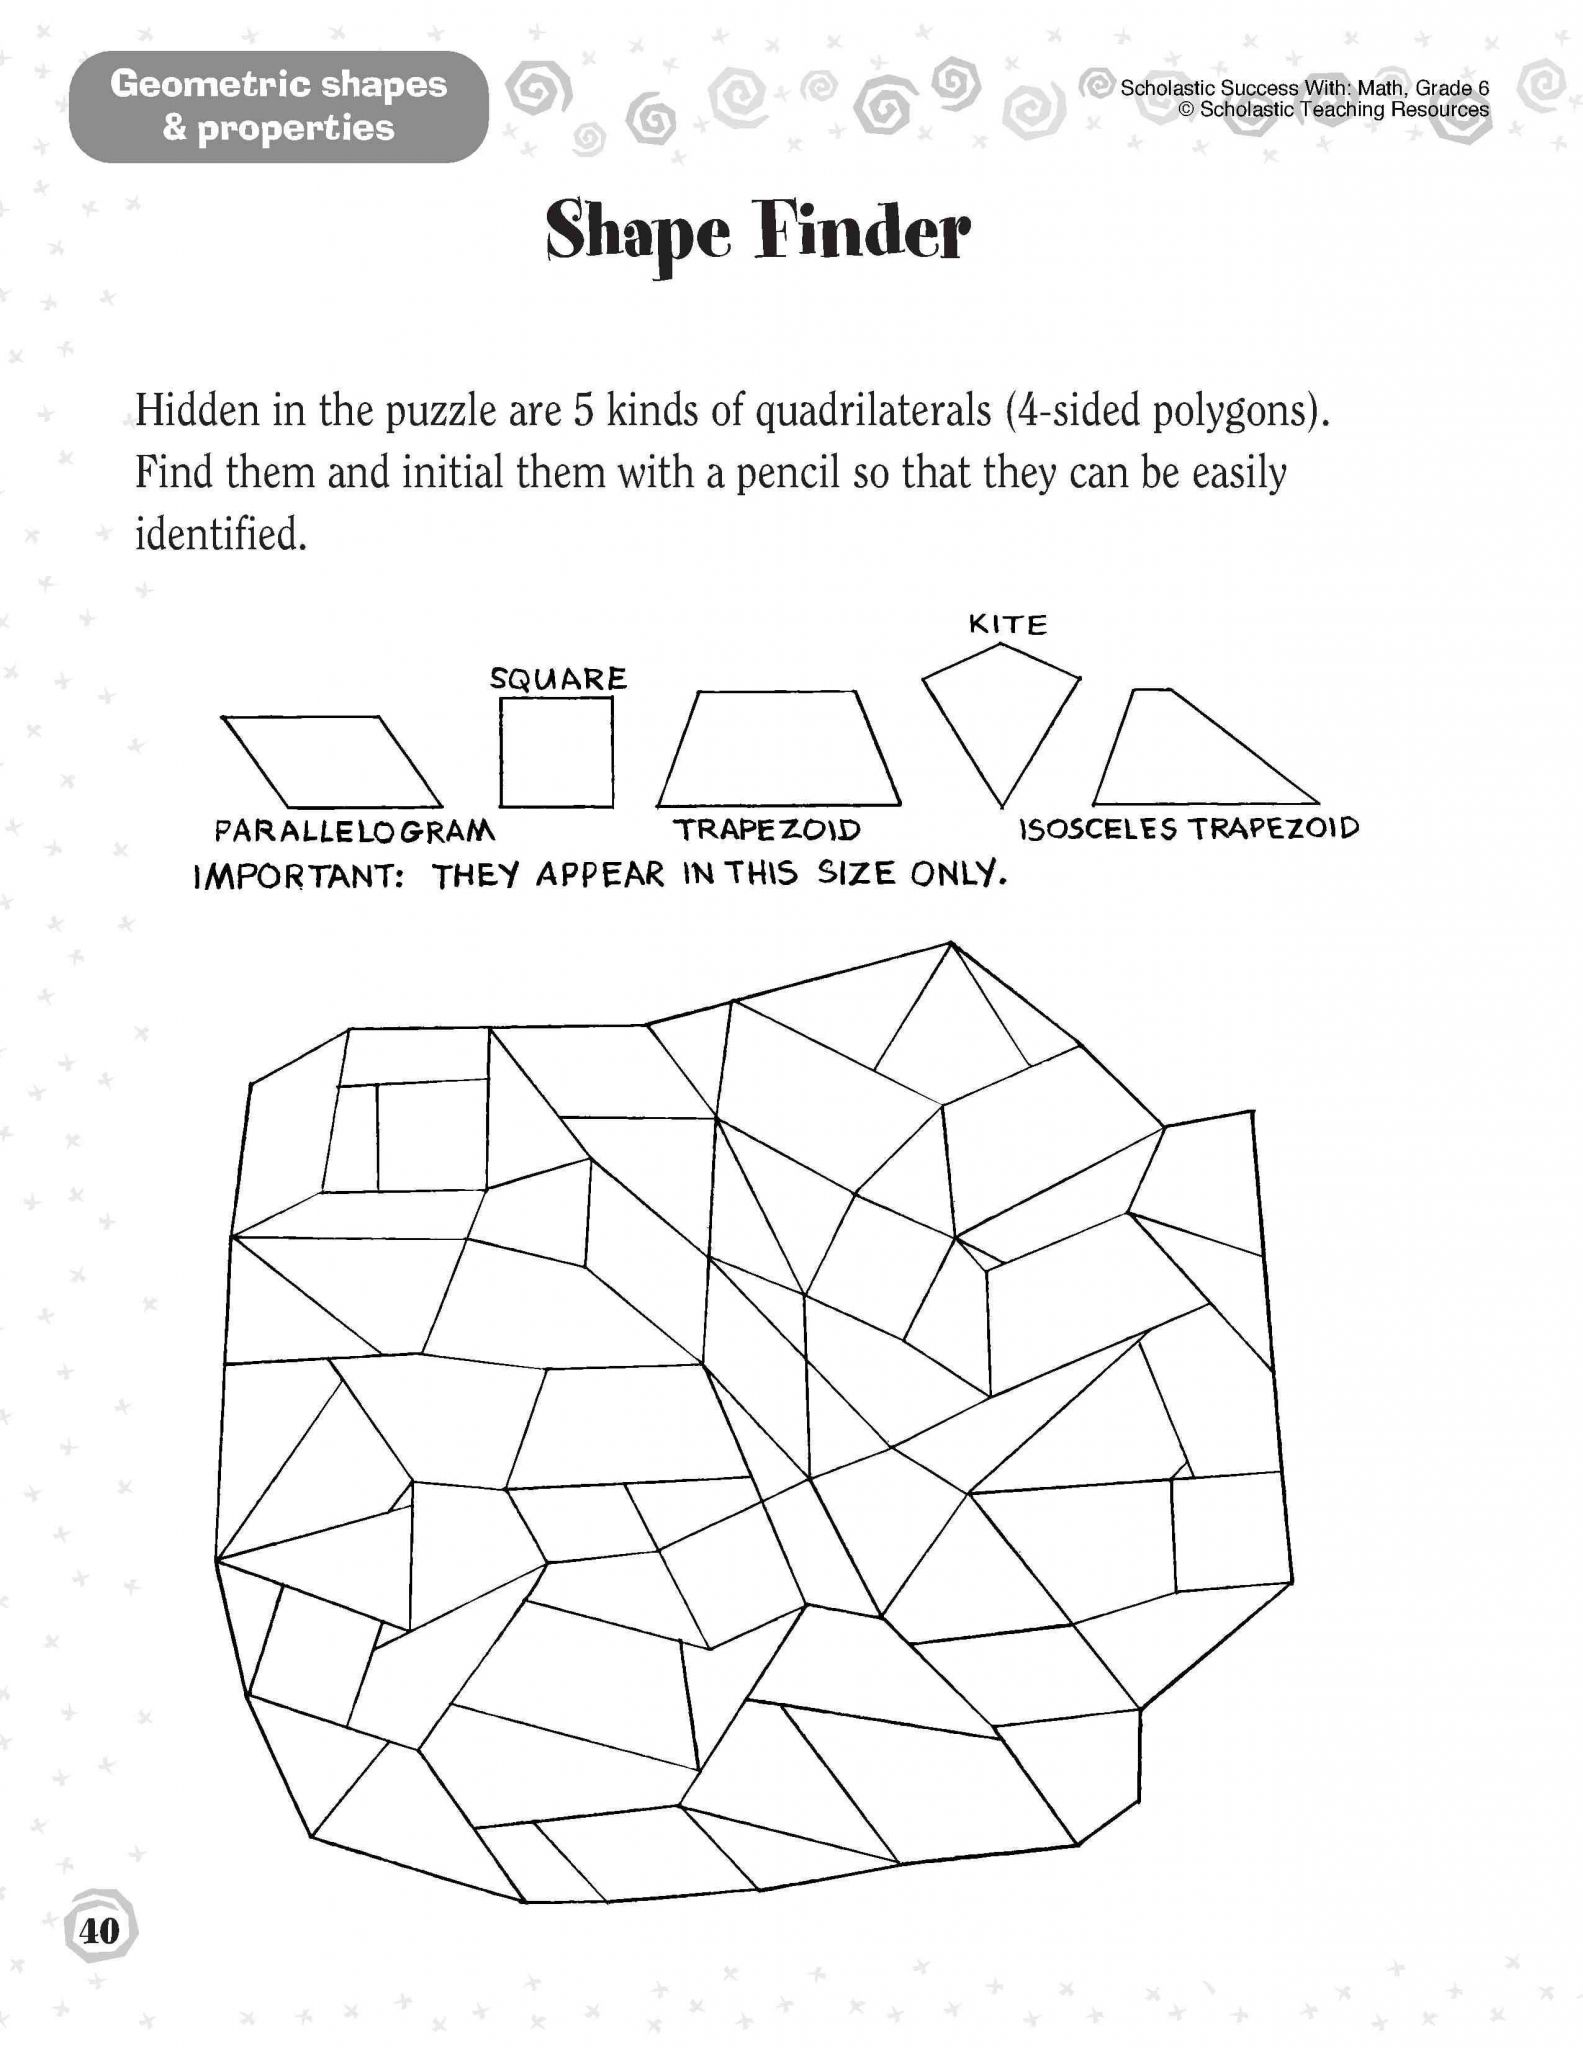 Quadrilaterals 3rd Grade Worksheets as Well as 5th Grade Geometry Worksheets Beautiful Math Worksheets for Grade 5